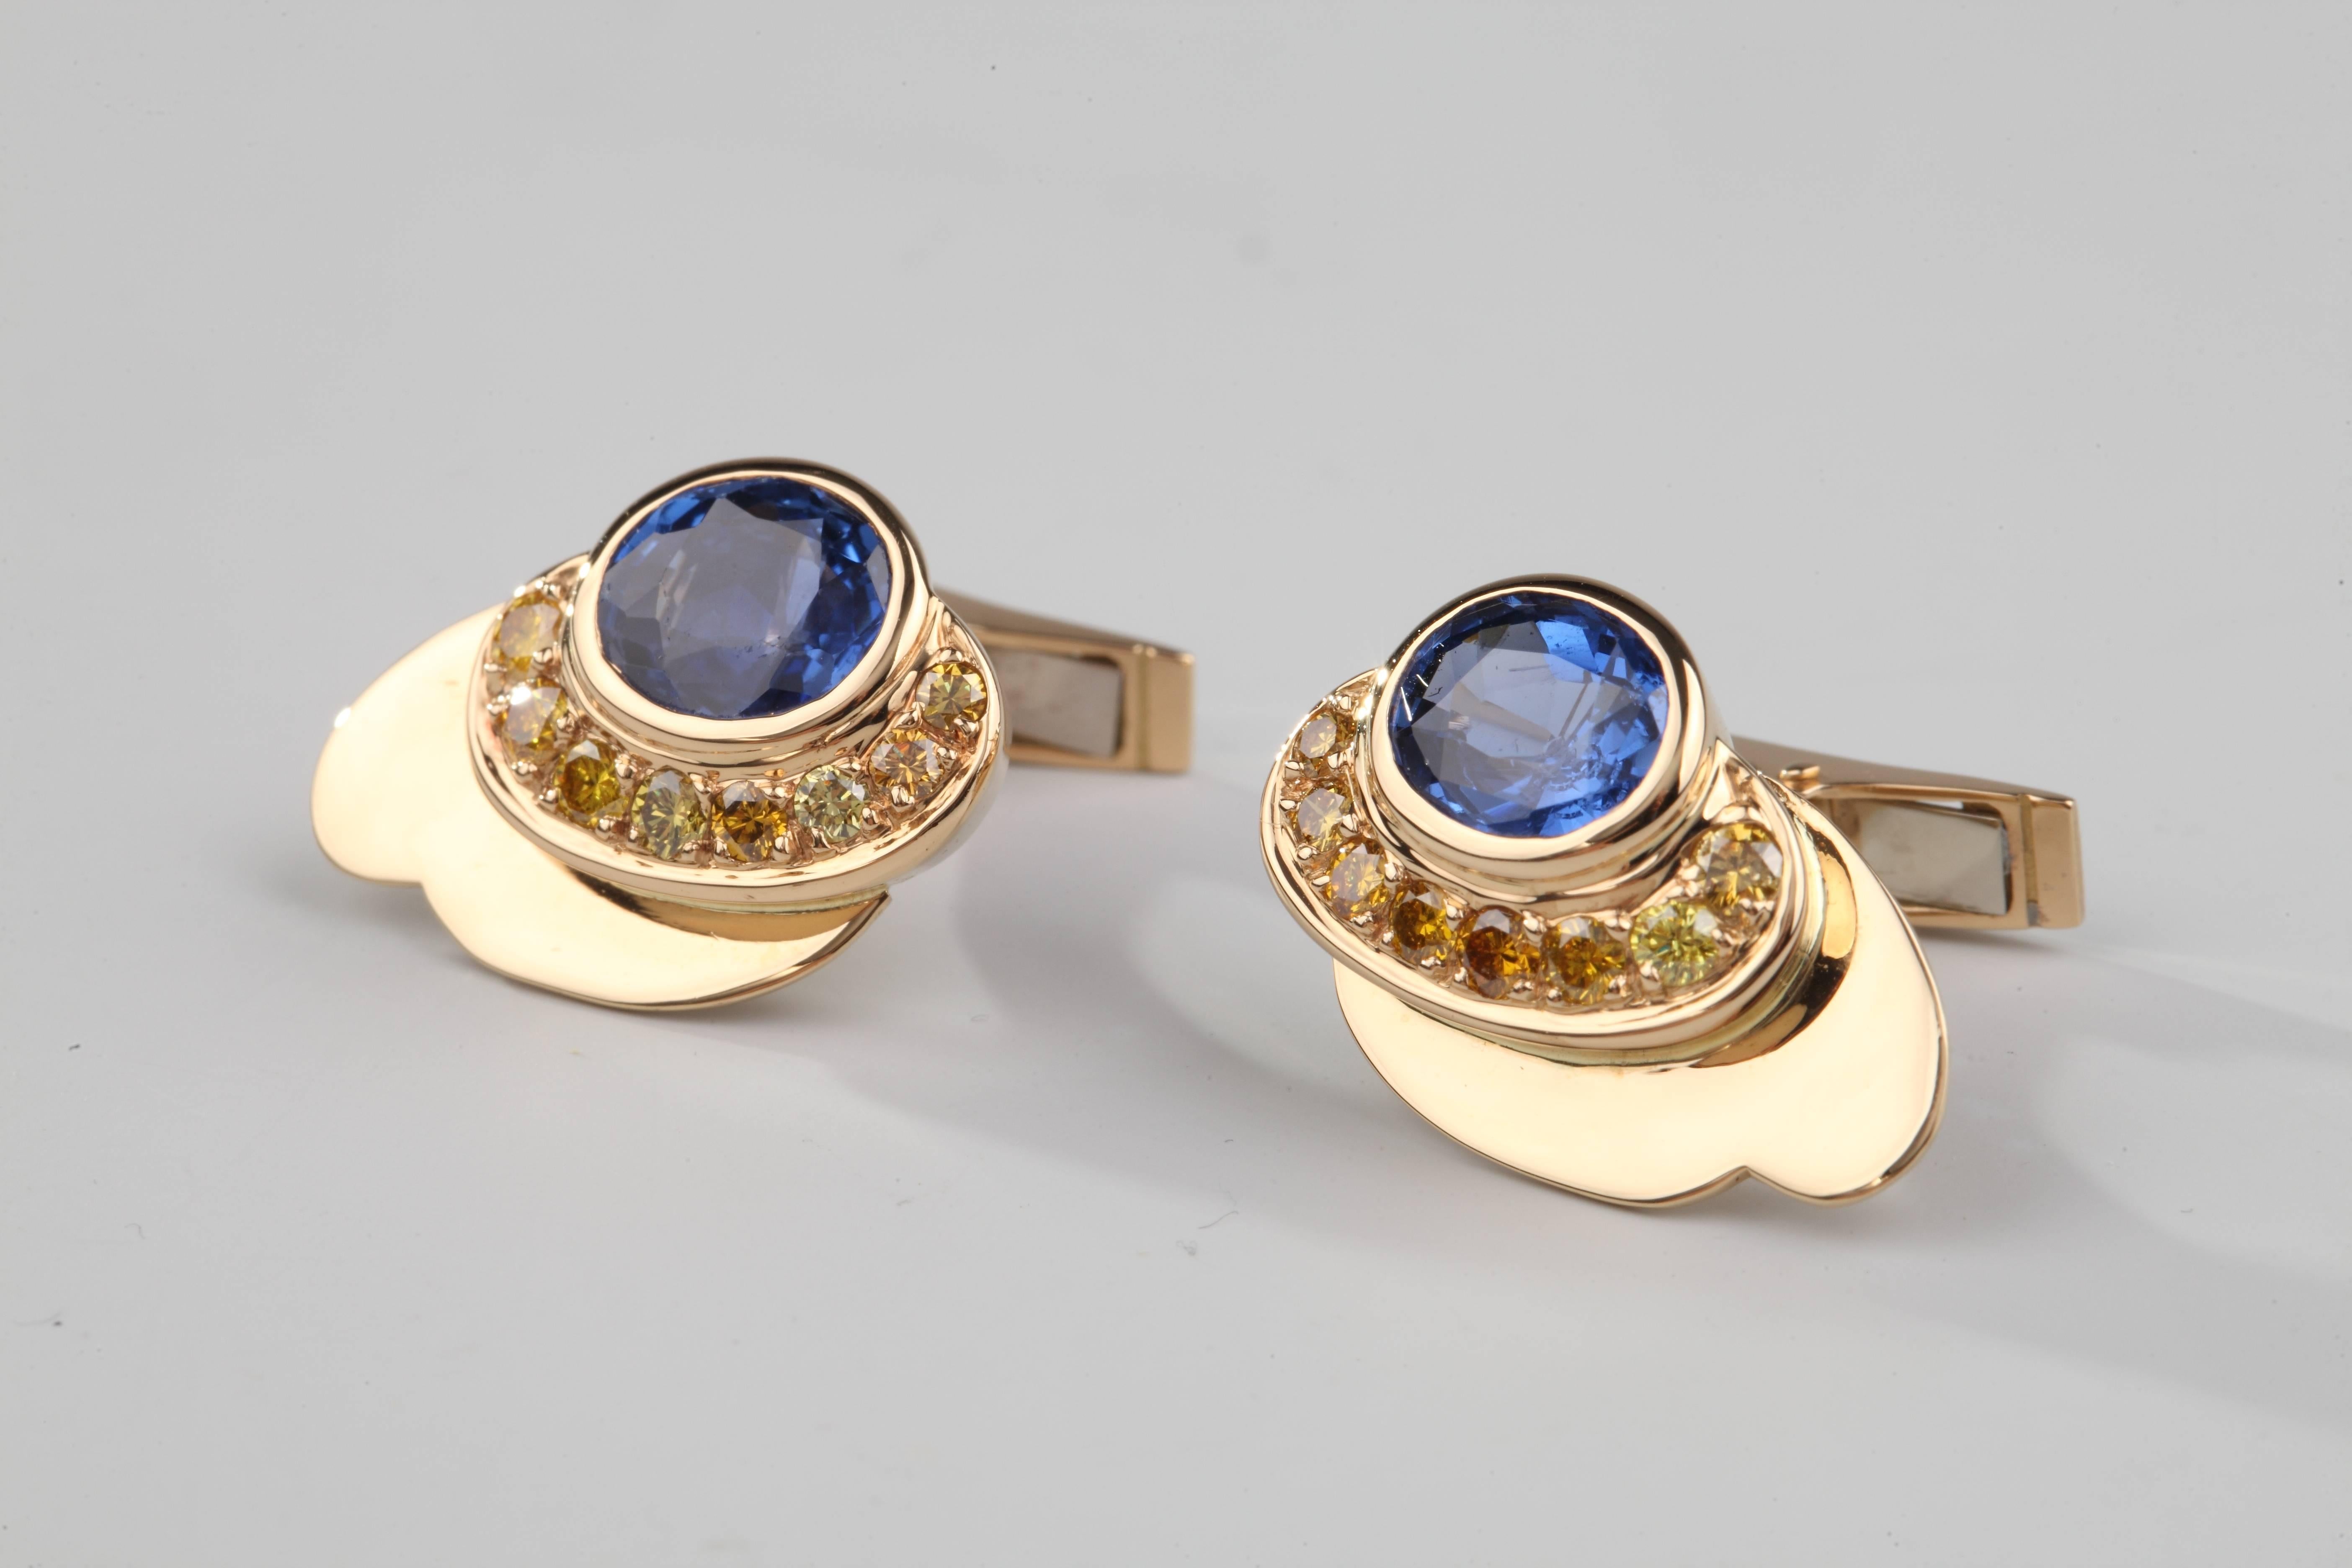 Cufflinks designed as a painter's pallet in yellow gold set with blue sapphires ( Sri-Lanka, natural color) highlighted by yellow diamonds.
Stamp for Jean Vendôme and french assay marks for gold.